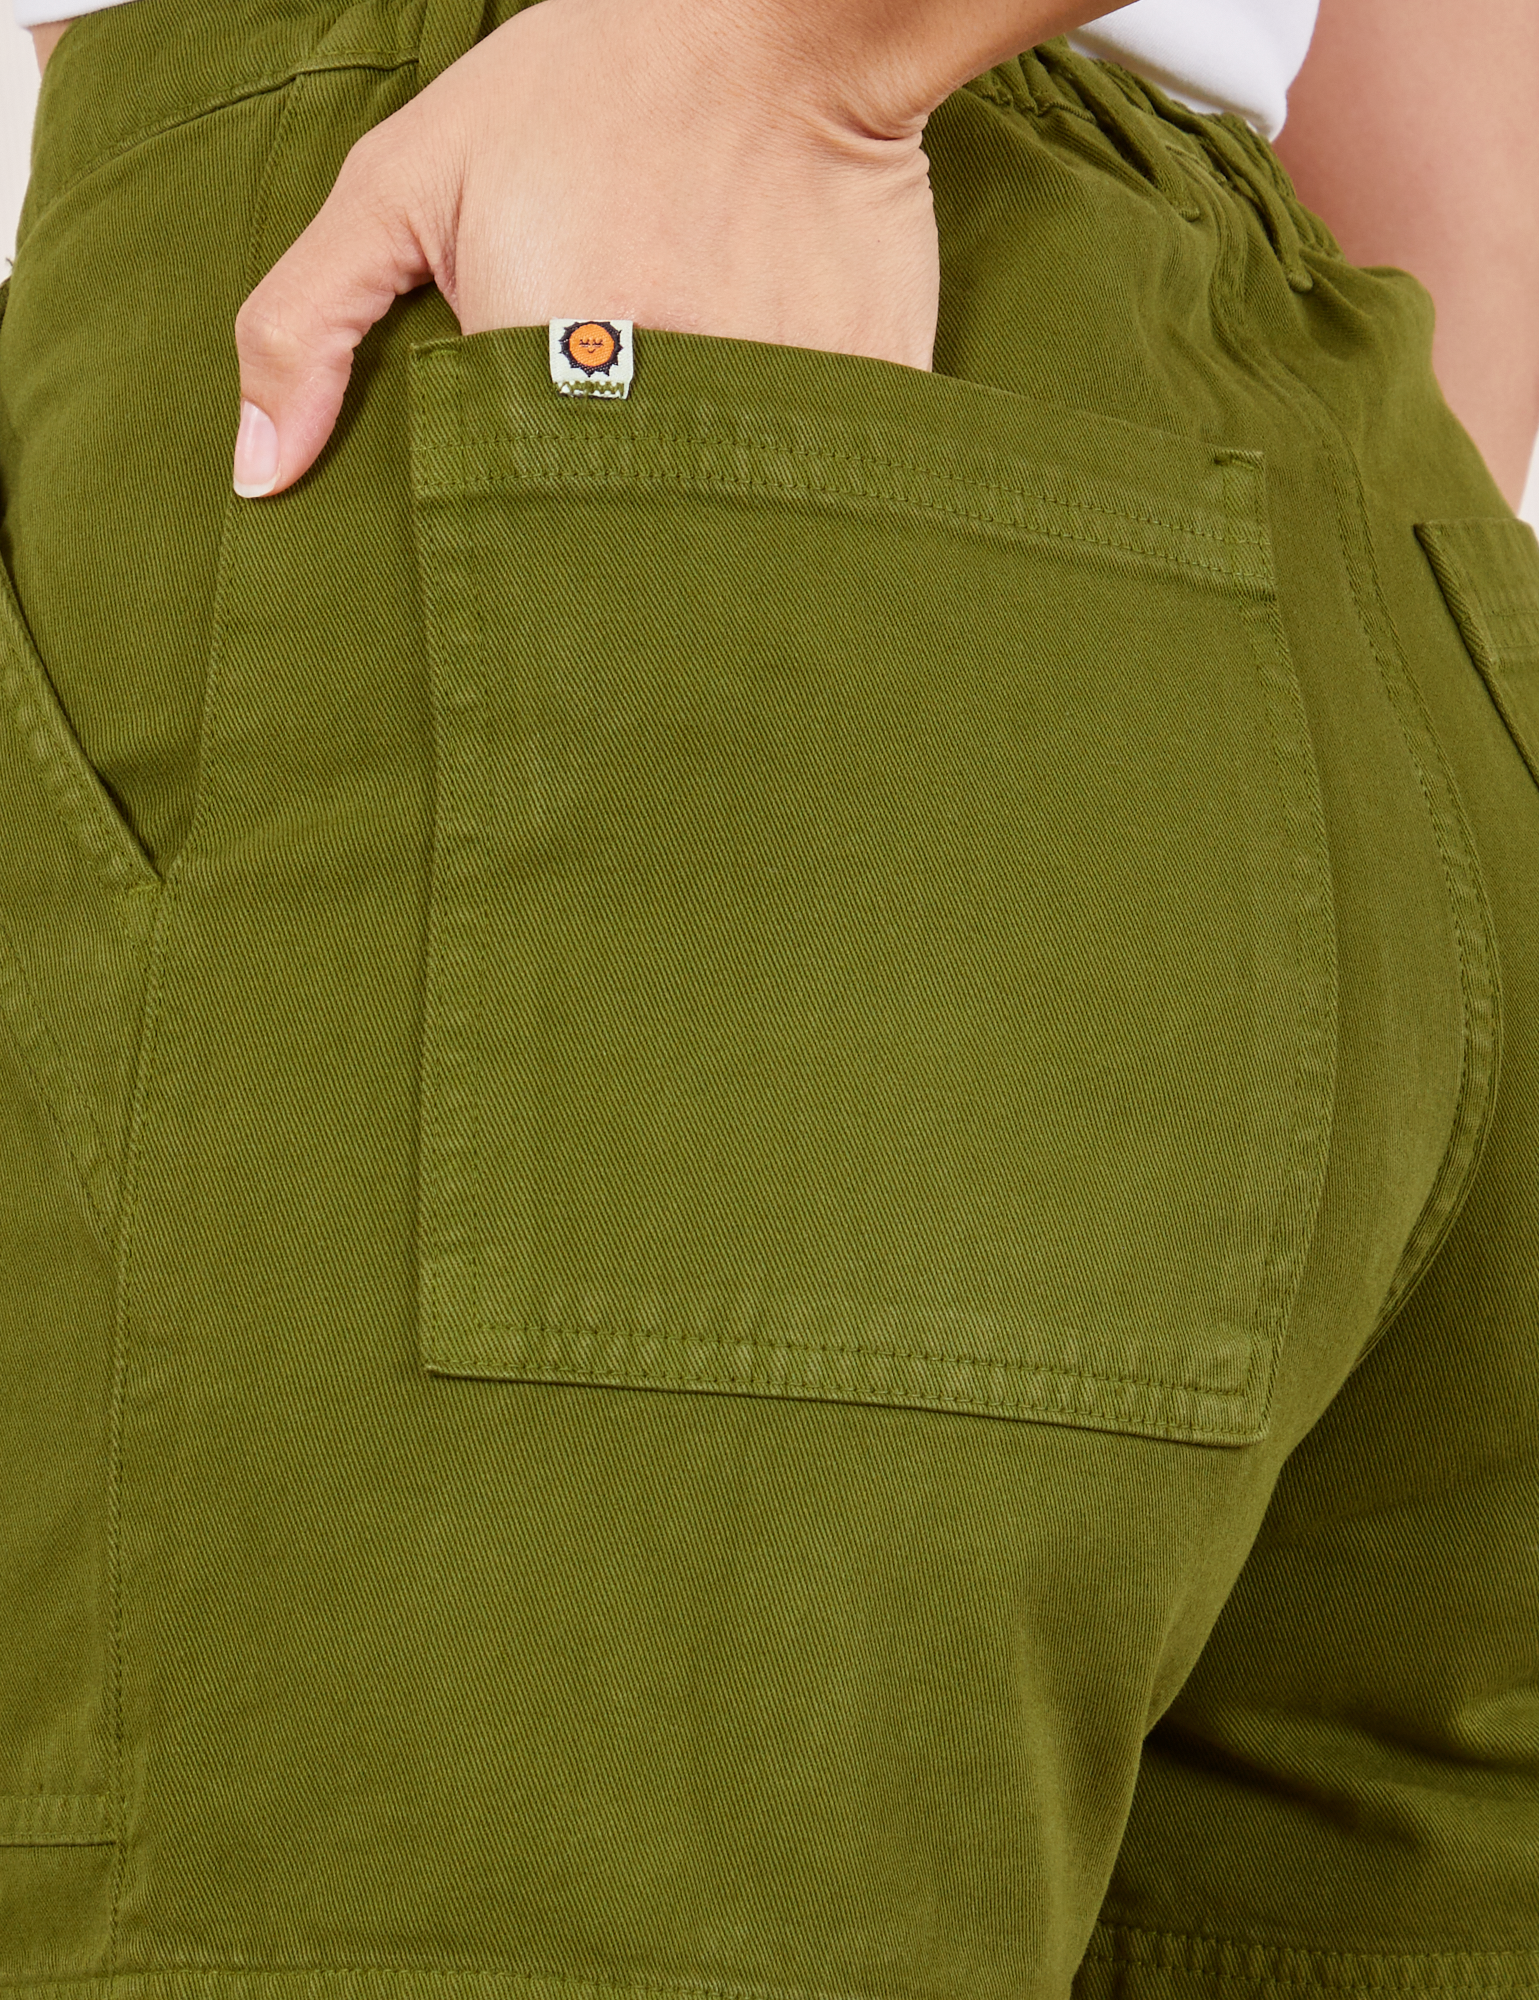 Classic Work Shorts in Summer Olive back pocket close up. Tiara has her hand in the pocket.